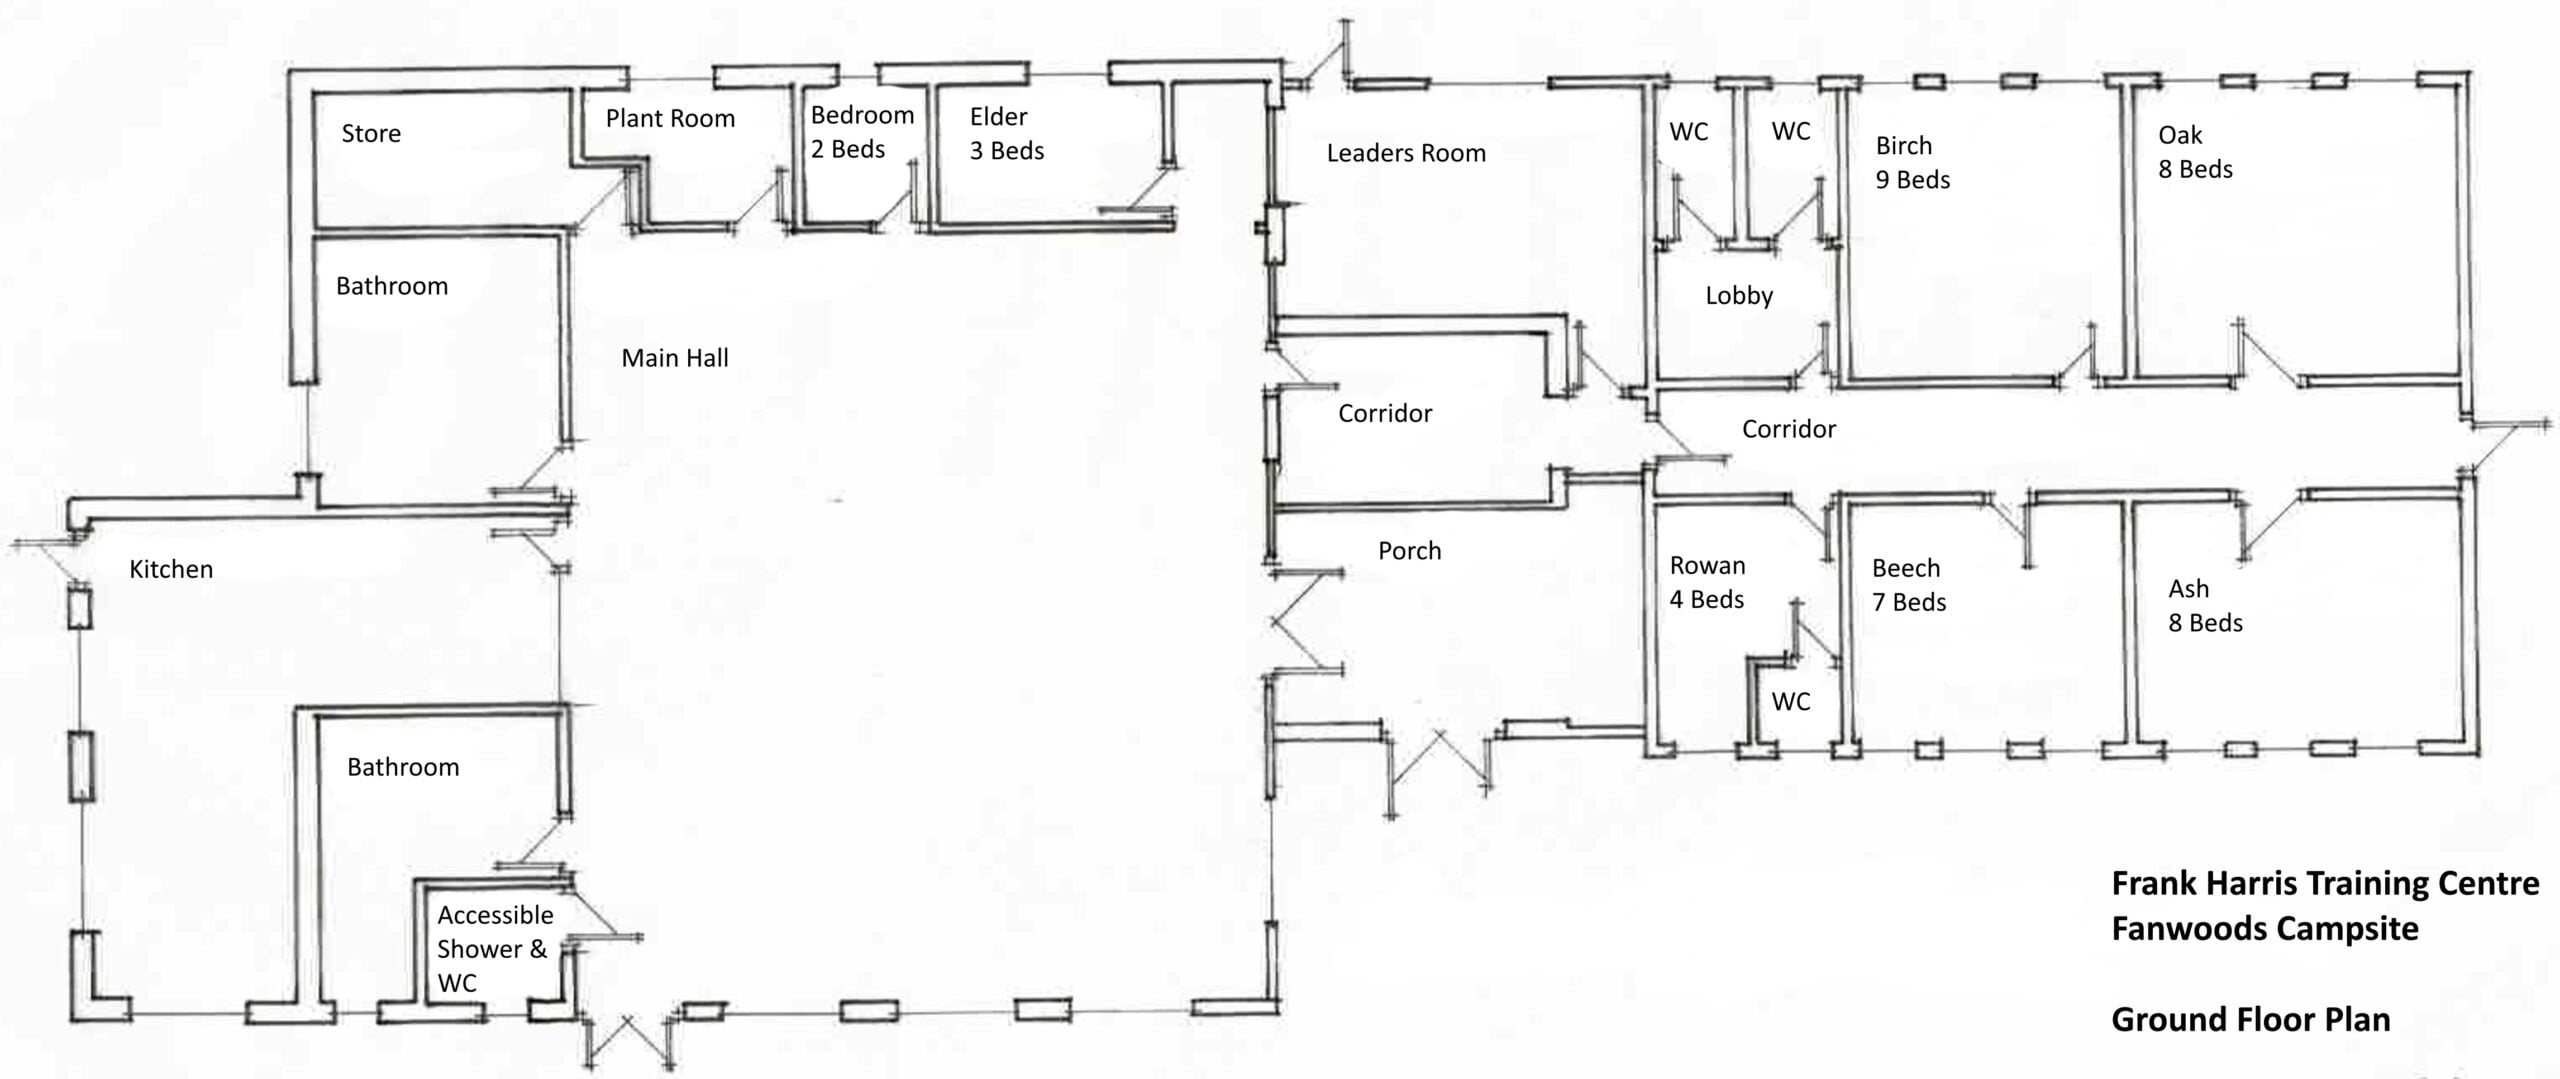 Ground Floor Plan of FHTC.
Click for larger image.